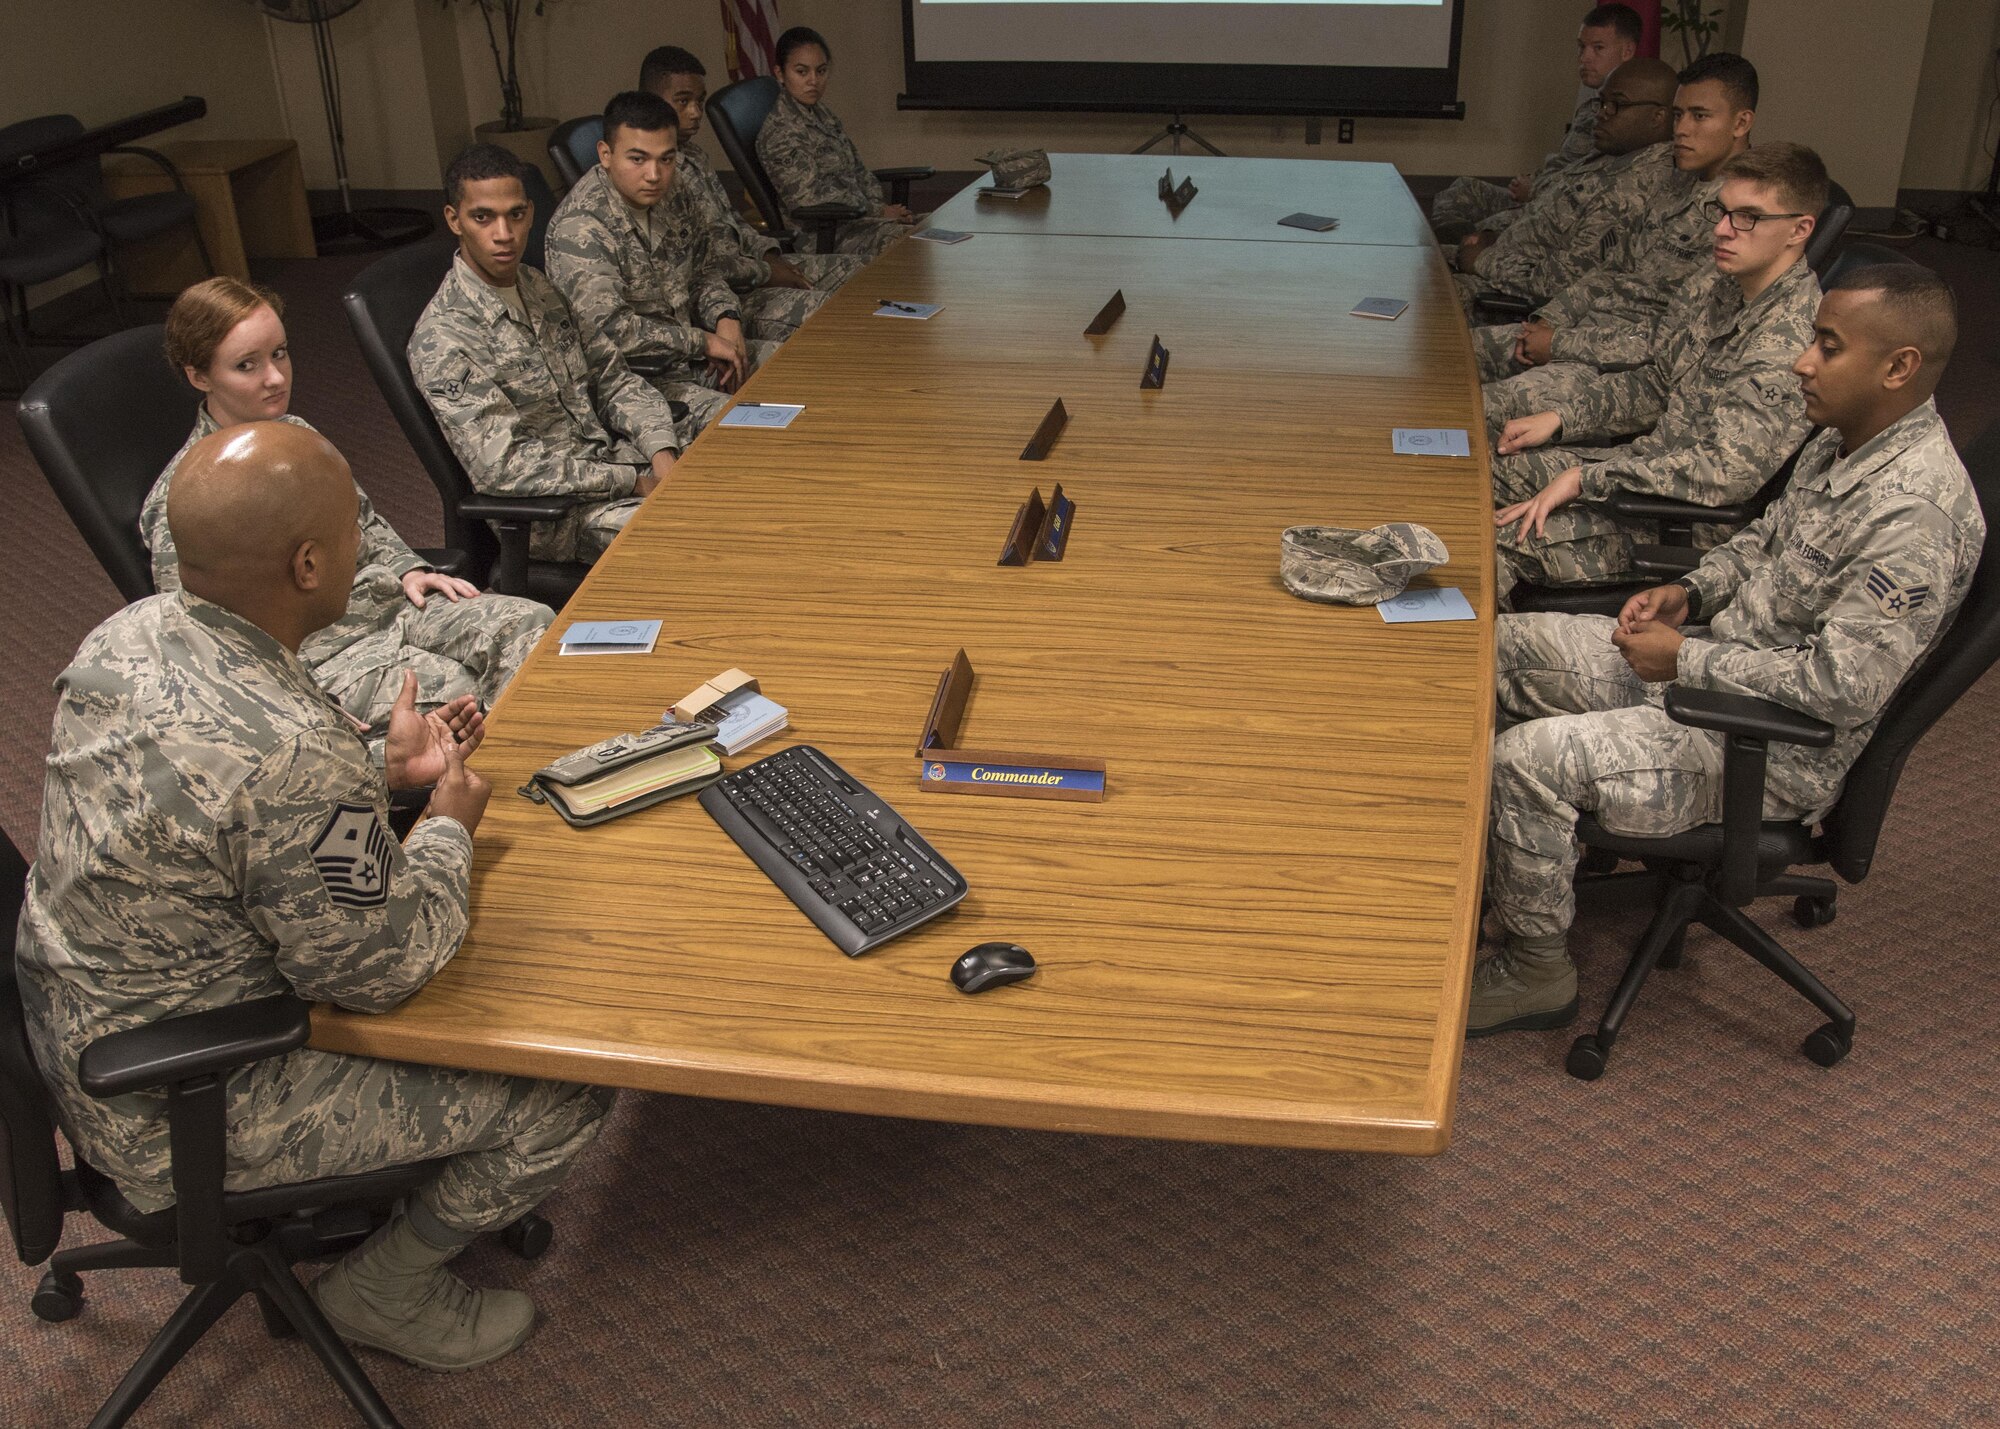 U.S. Air Force Master Sgt. Jose Ramon, the 35th Logistics Readiness Squadron first sergeant, speaks with Airmen during a newcomer's brief at Misawa Air Base, Japan, Sept. 19, 2016. During the brief, Ramon discussed with Airmen his expectations as their shirt and informed them about resoures the first sergeants offer. (U.S. Air Force photo by Airman 1st Class Sadie Colbert)